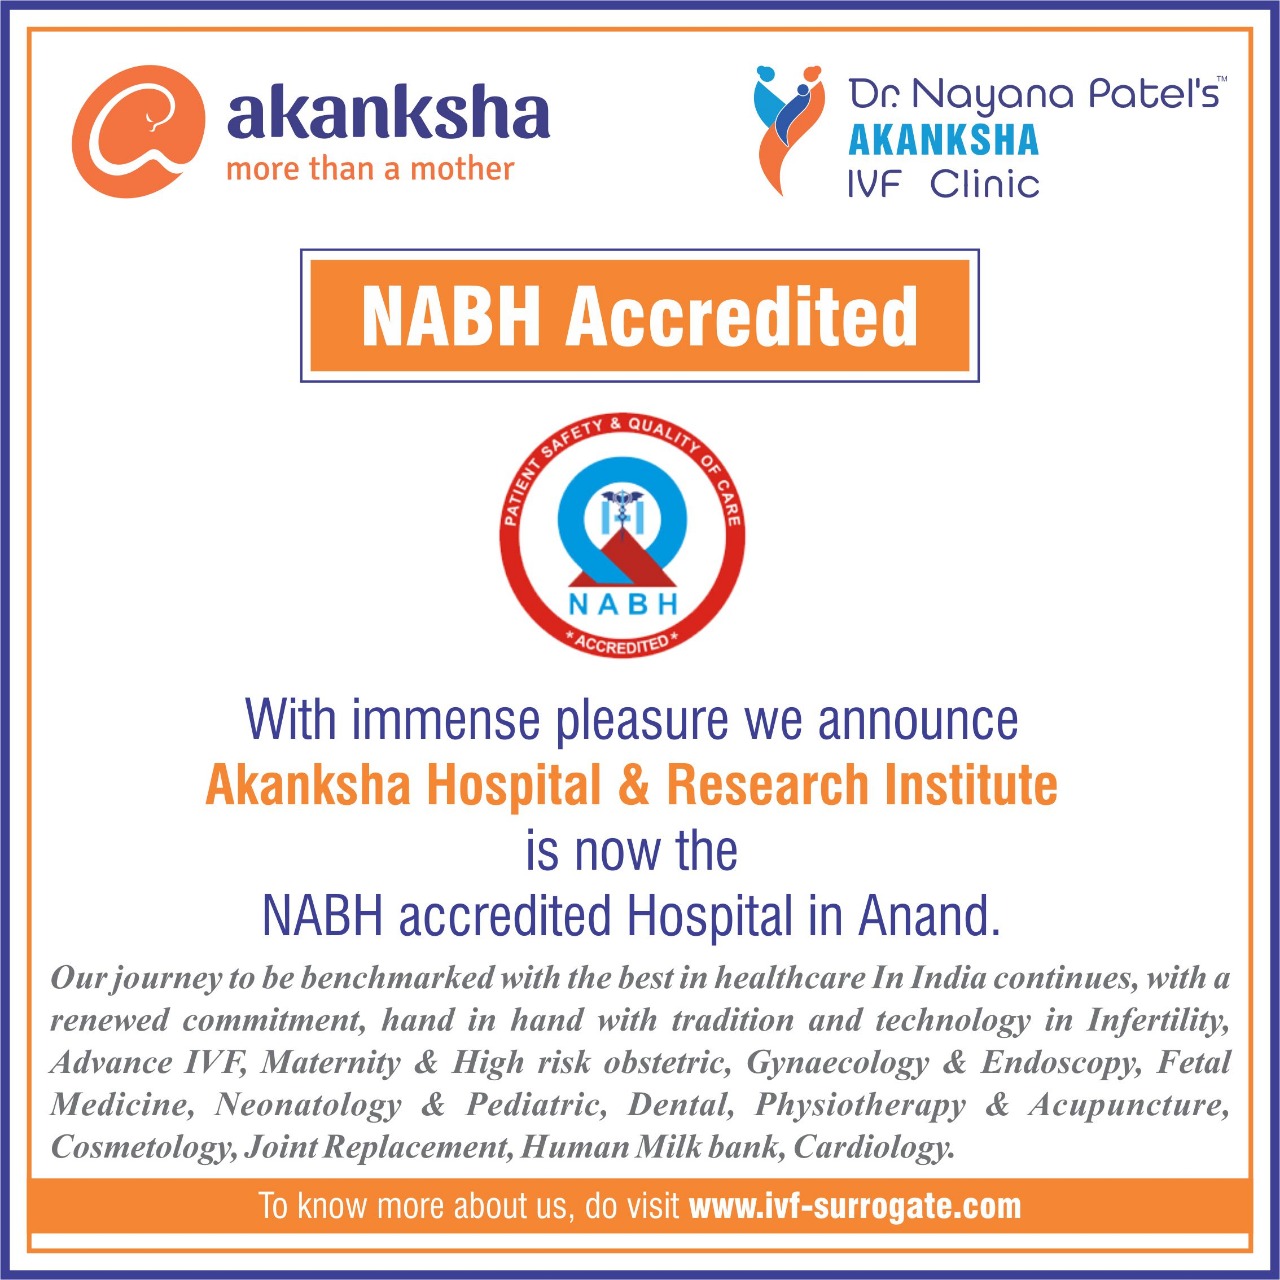 Akanksha Hospital & Research Institute is now the NABH accrediated Hospital in Anand